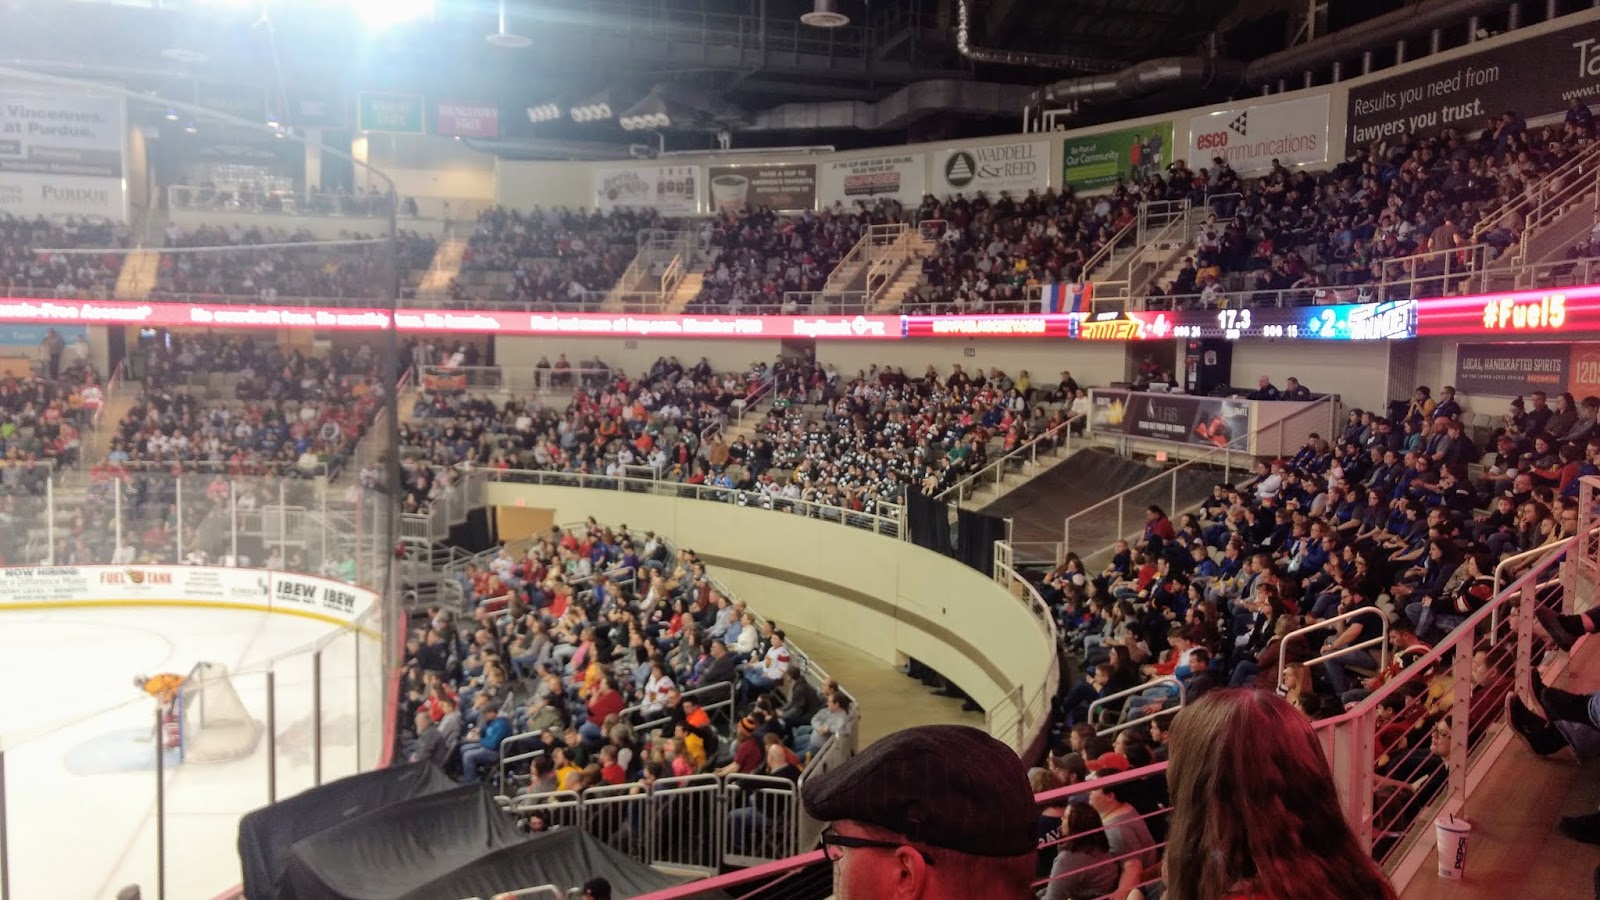 Indiana Farmers Coliseum, Indy Fuel 